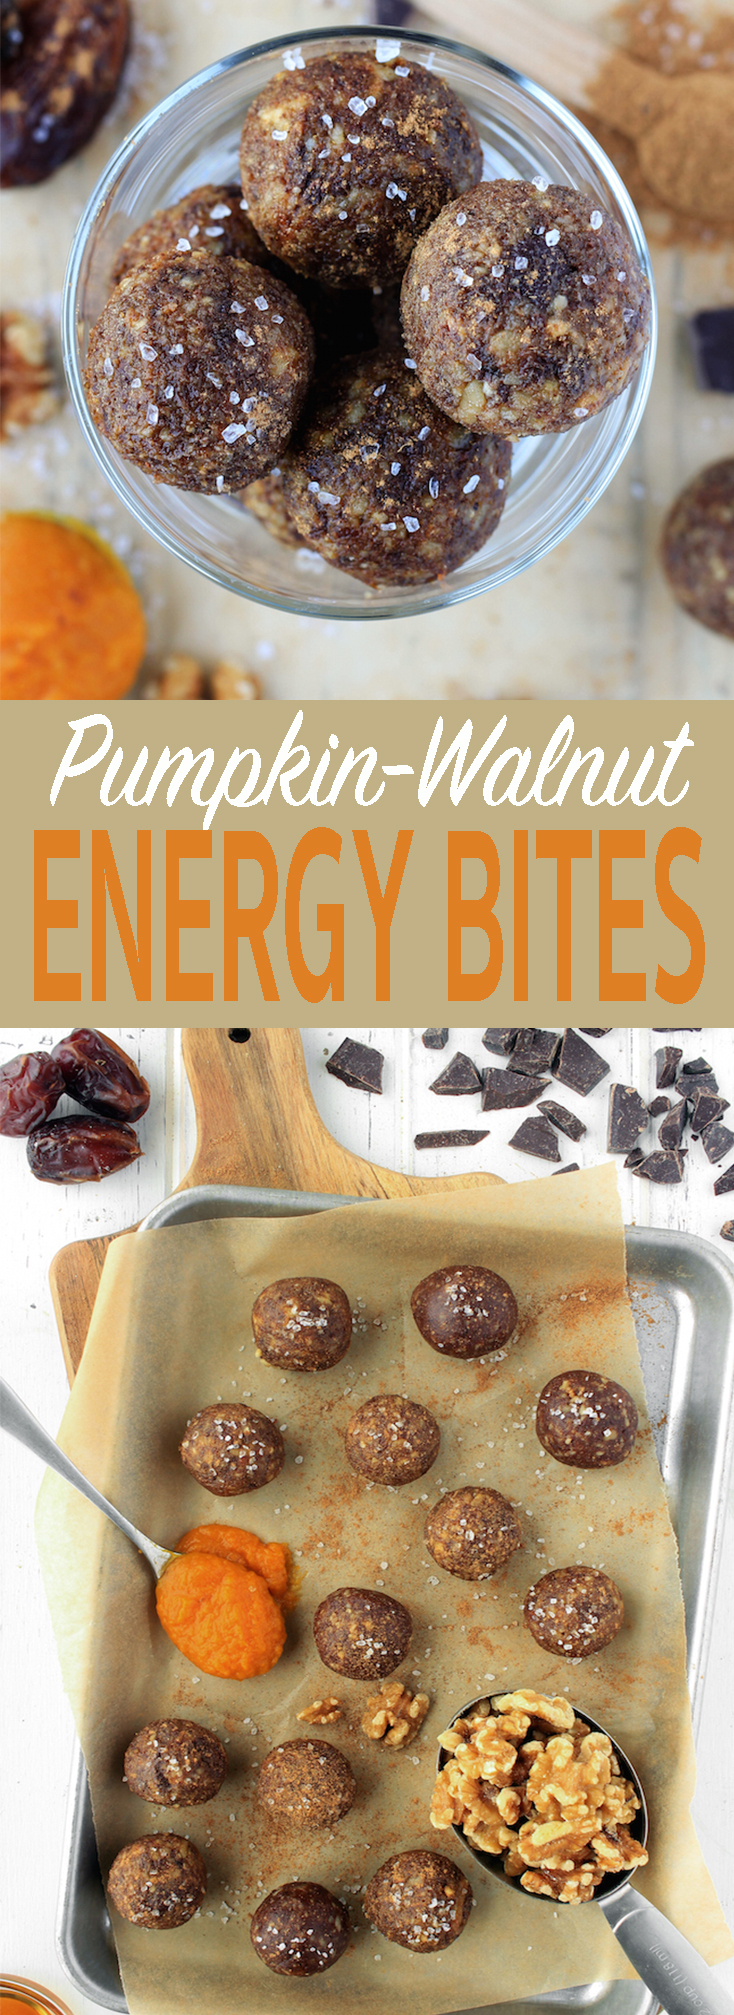 Easy no-bake, 6-ingredient pumpkin walnut energy bites made with real food ingredients like walnuts, dates and pumpkin. #freezable #makeahead #vegan #glutenfree